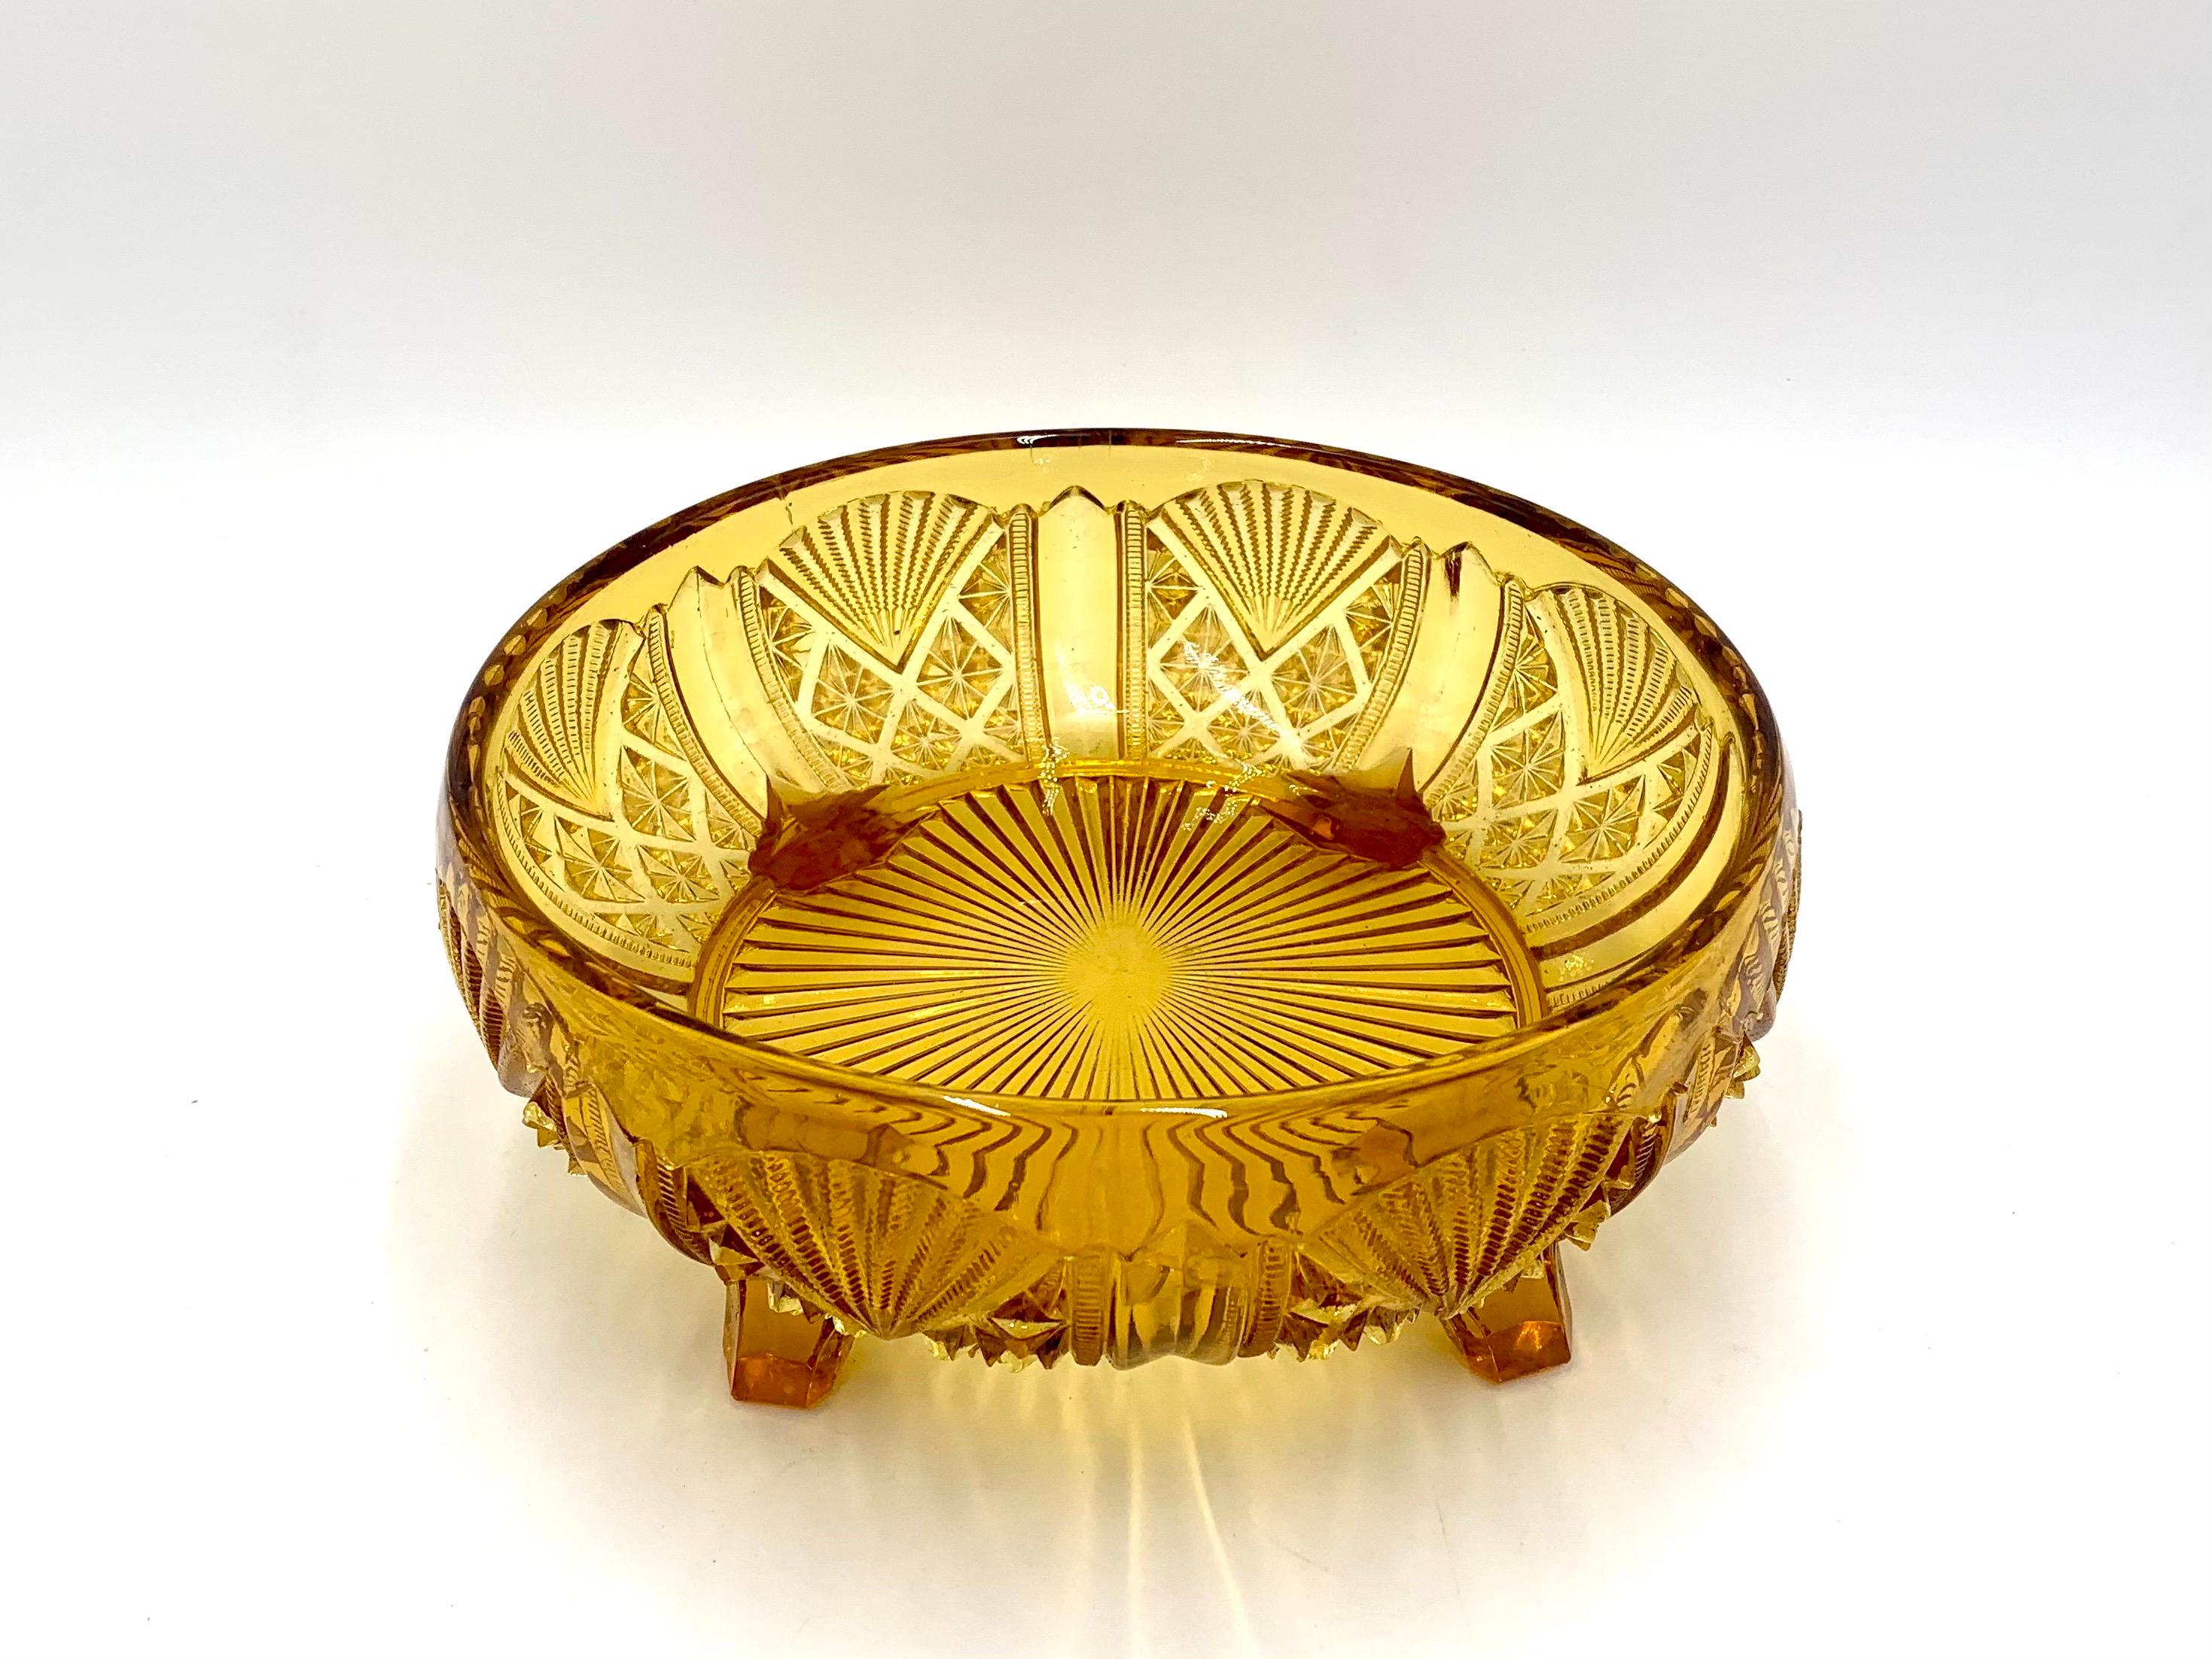 Art Deco honey bowl supported on four legs made of pressed glass

It comes from around 1930.

One leg is slightly damaged

Measures: height 9.5 cm, diameter 21.5 cm.